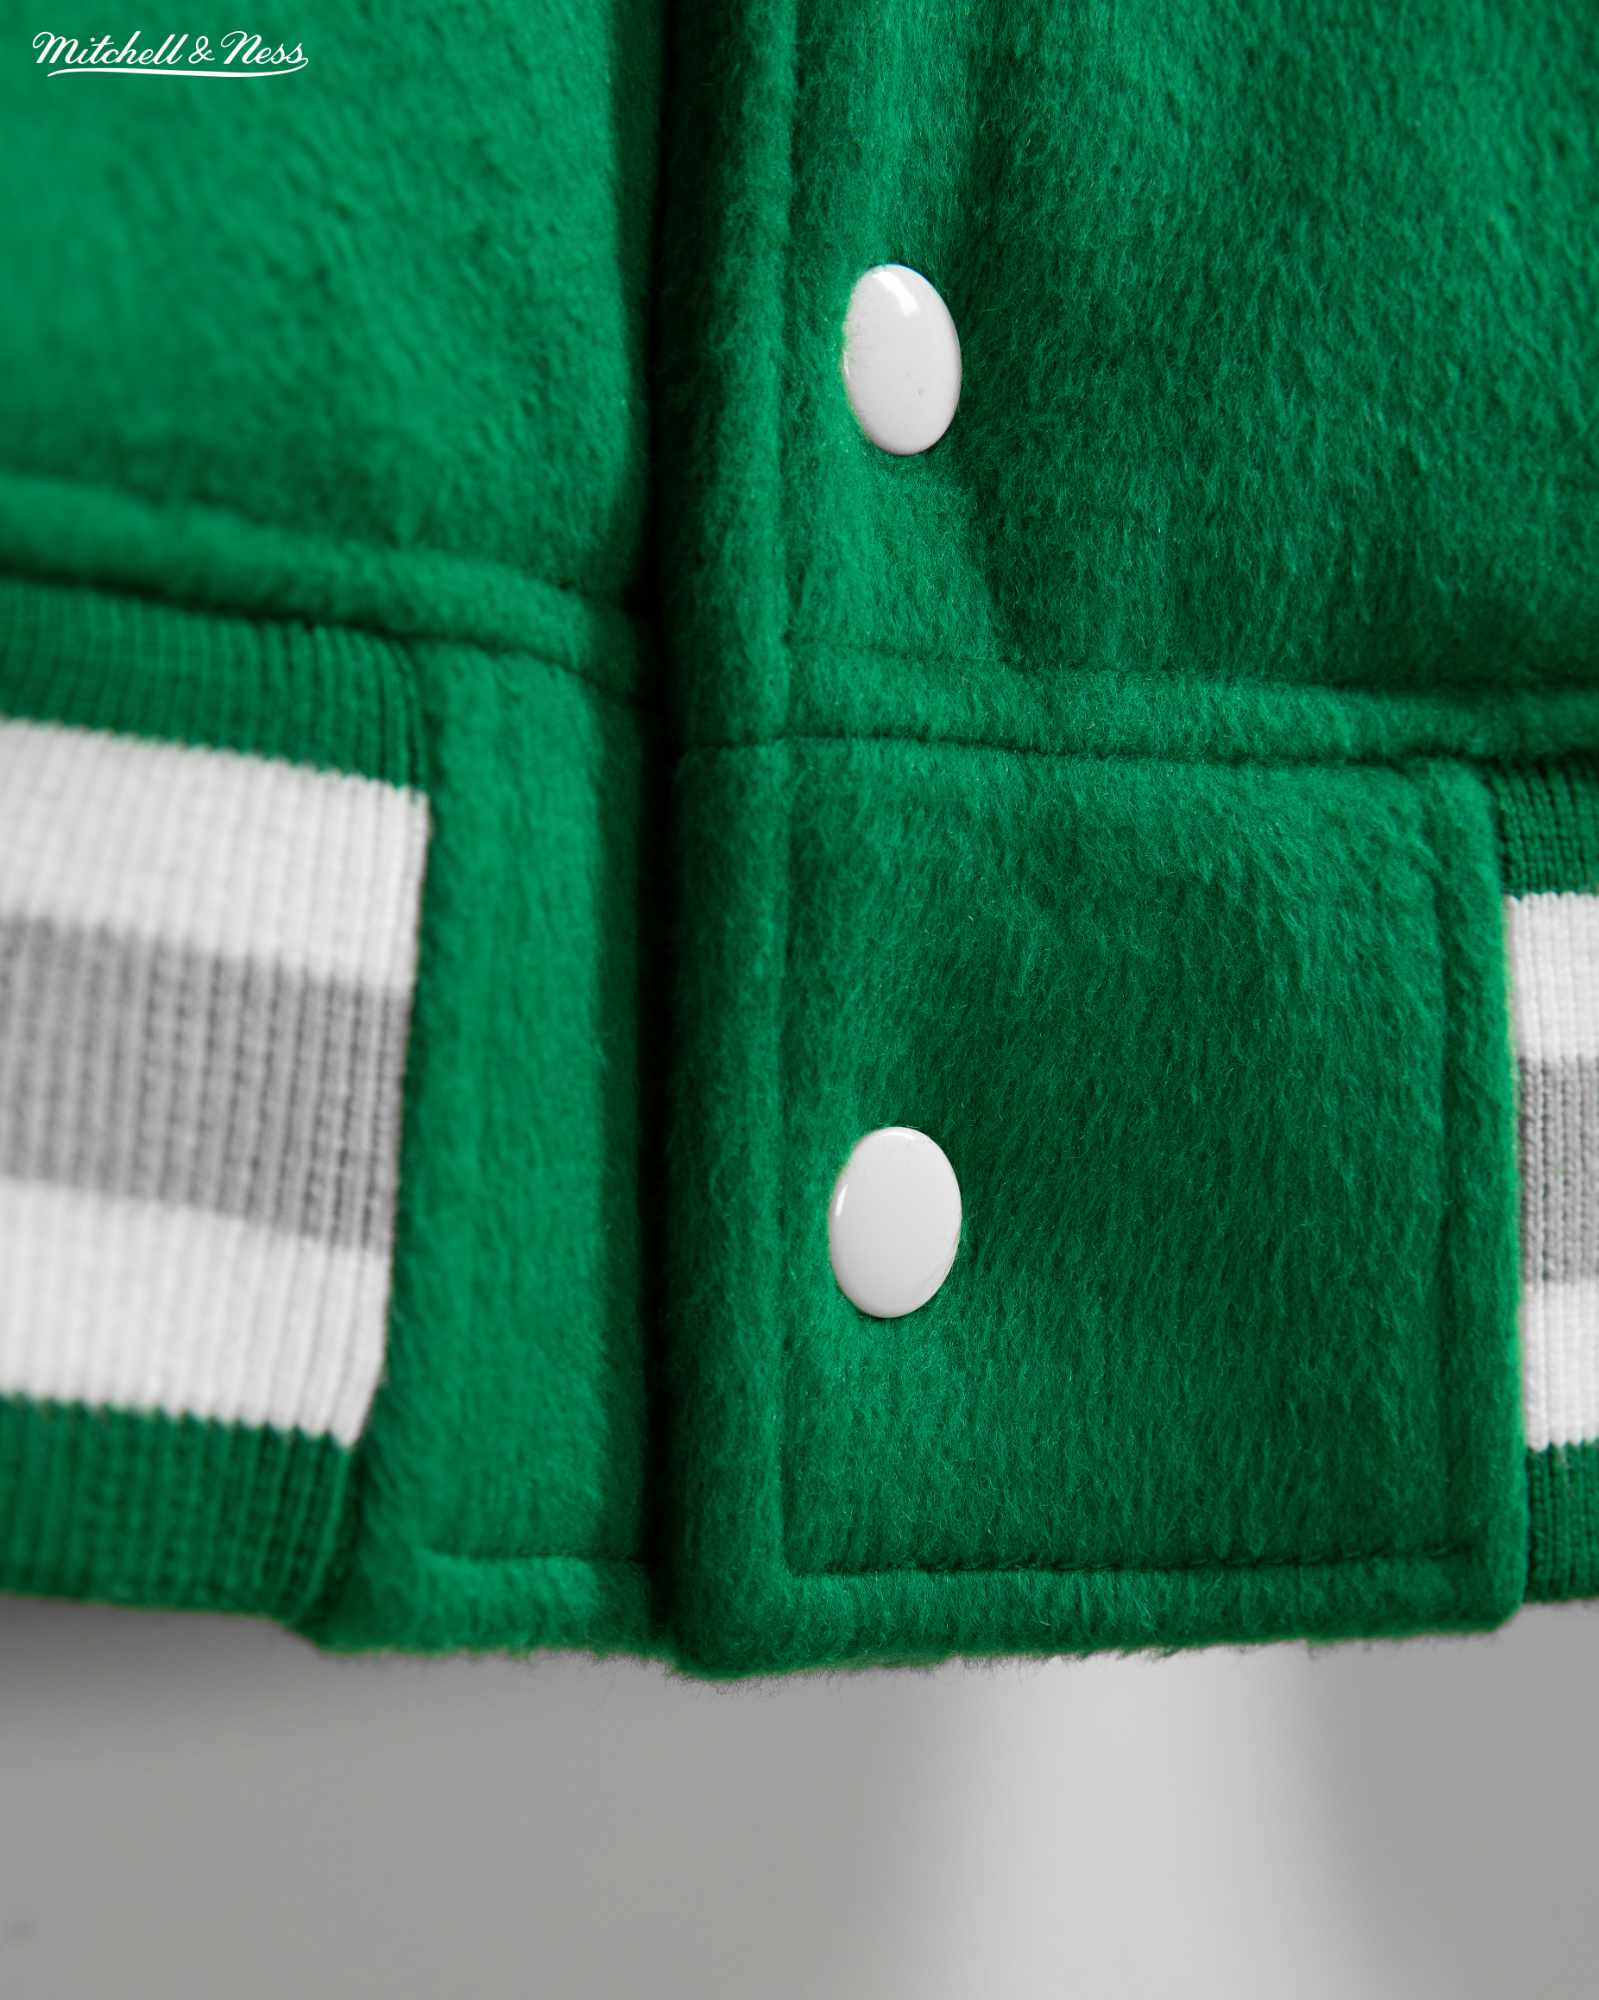 Product photos of Mitchel & Ness' Princess Diana Eagles jacket recreation in green wool and silver leather releasing in November 2023